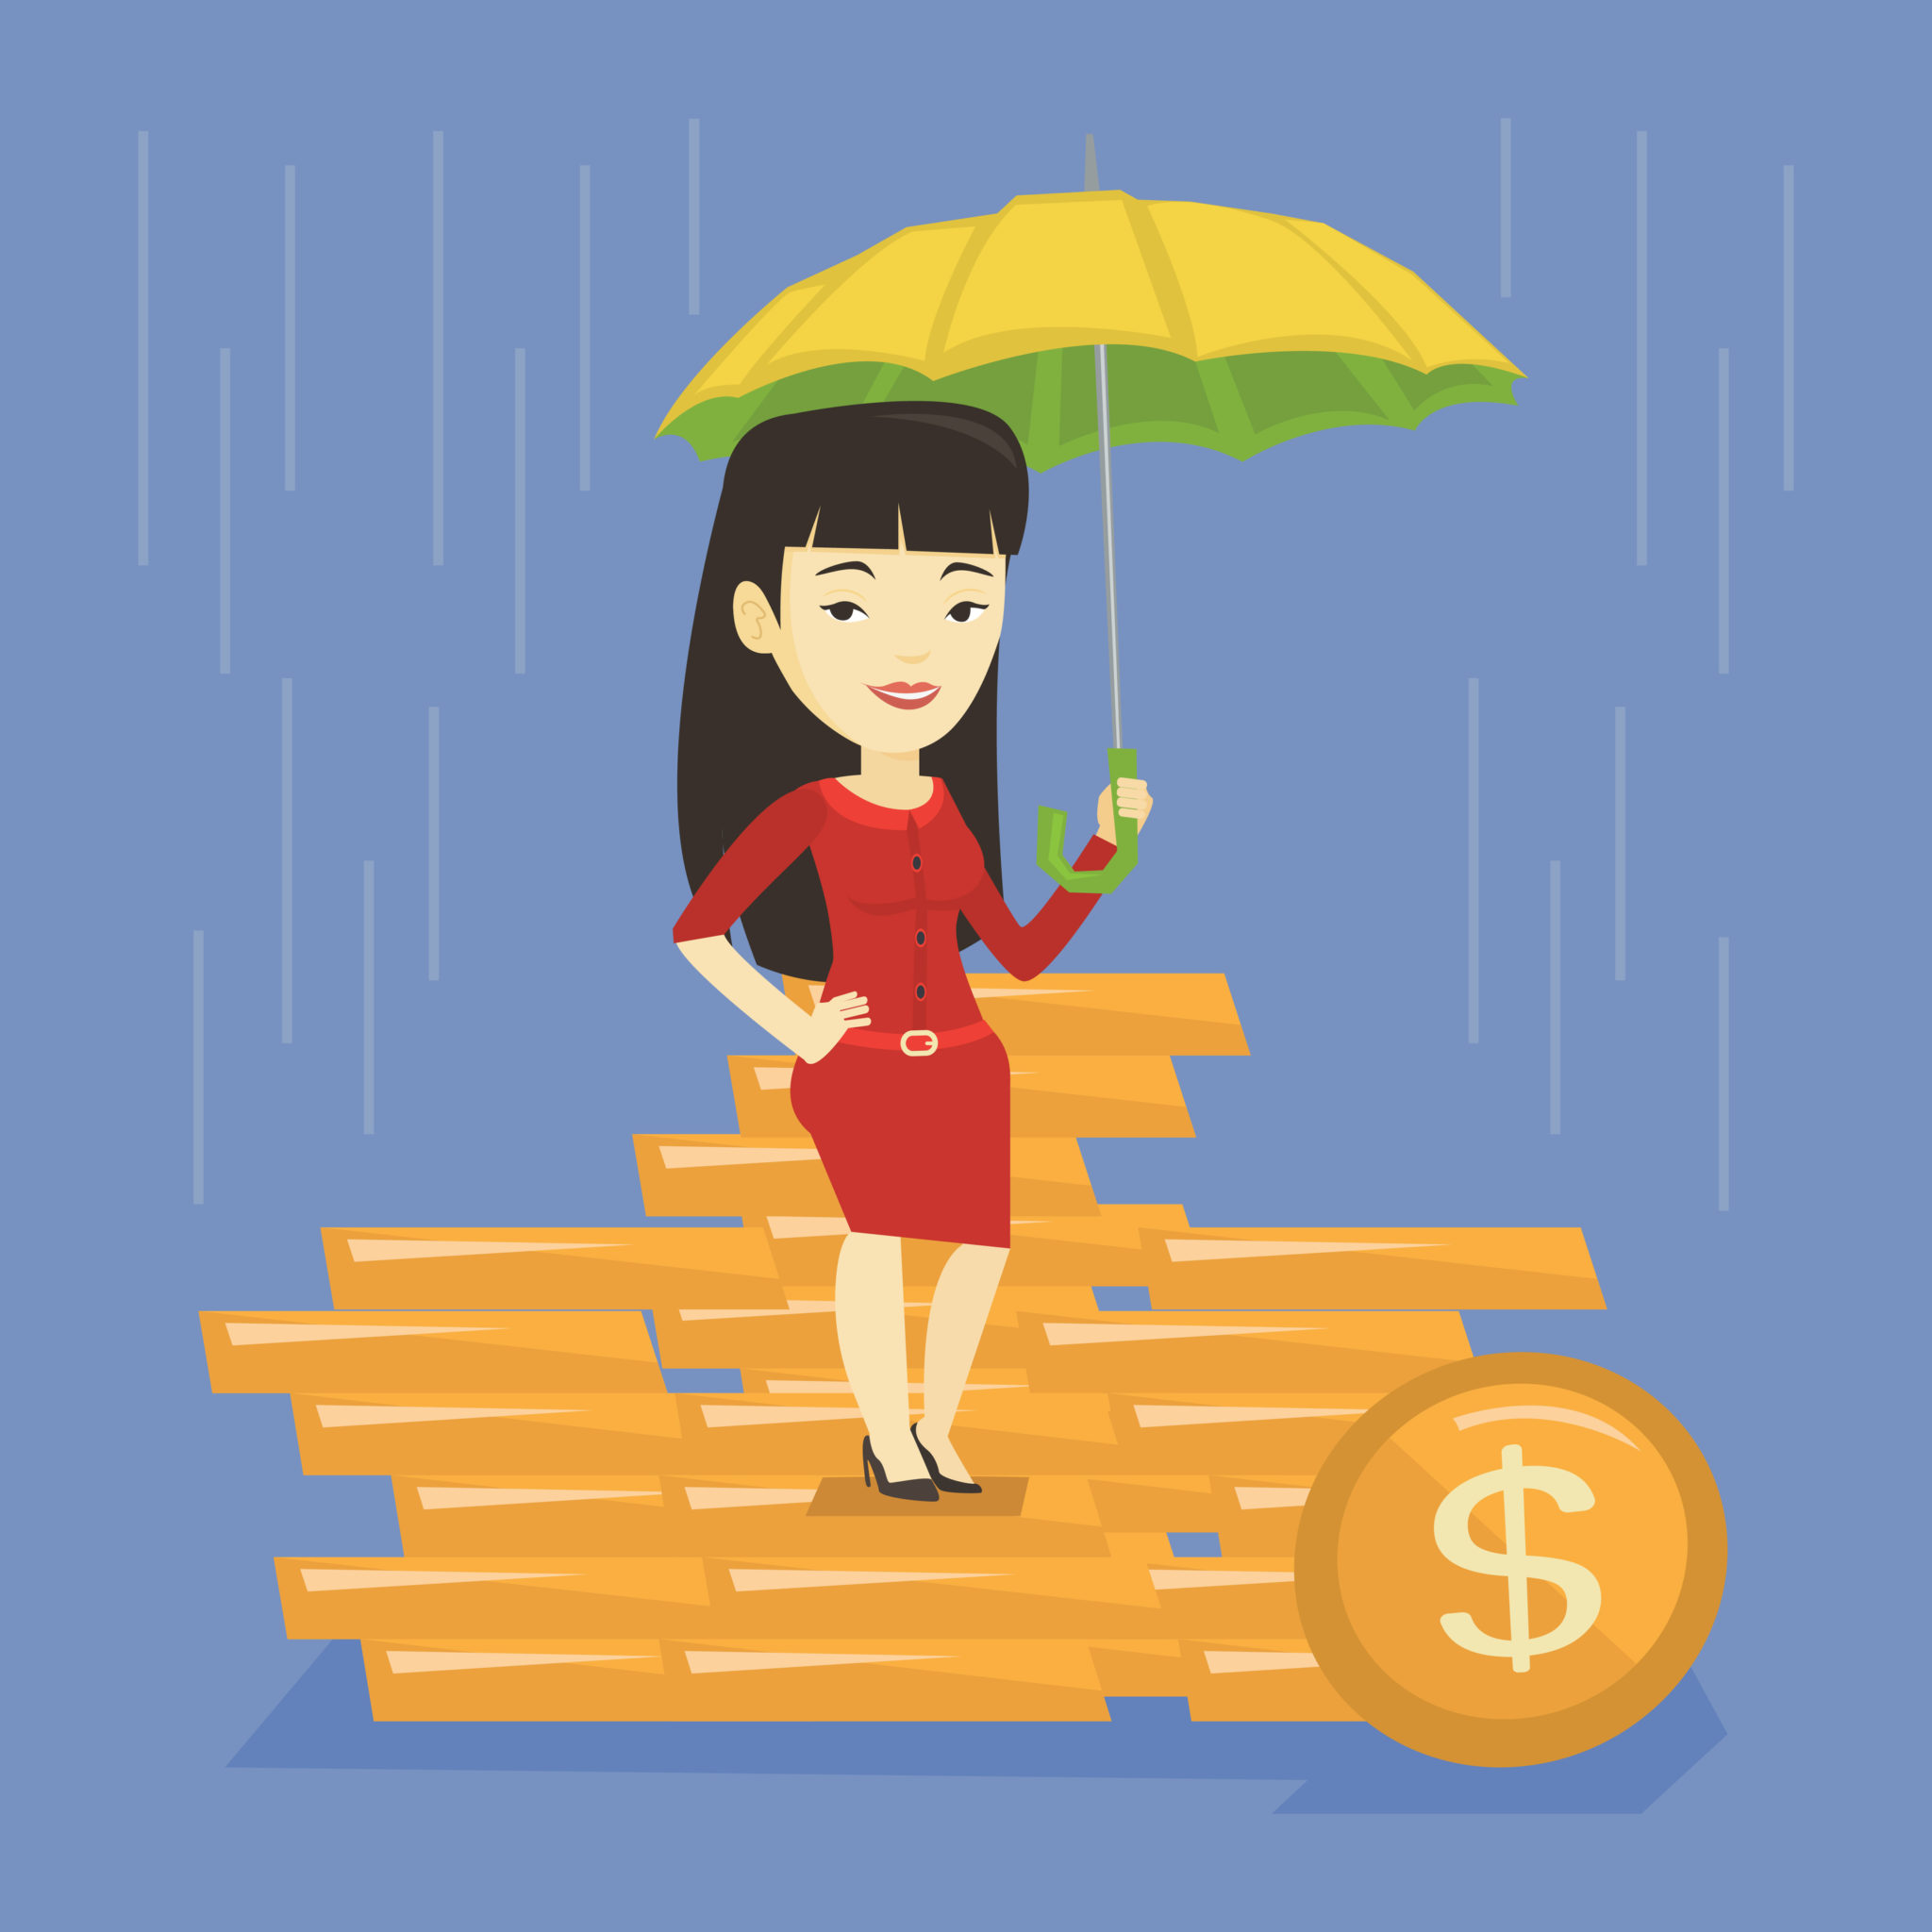 Umbrella Insurance - A chat with Shannon Stiles